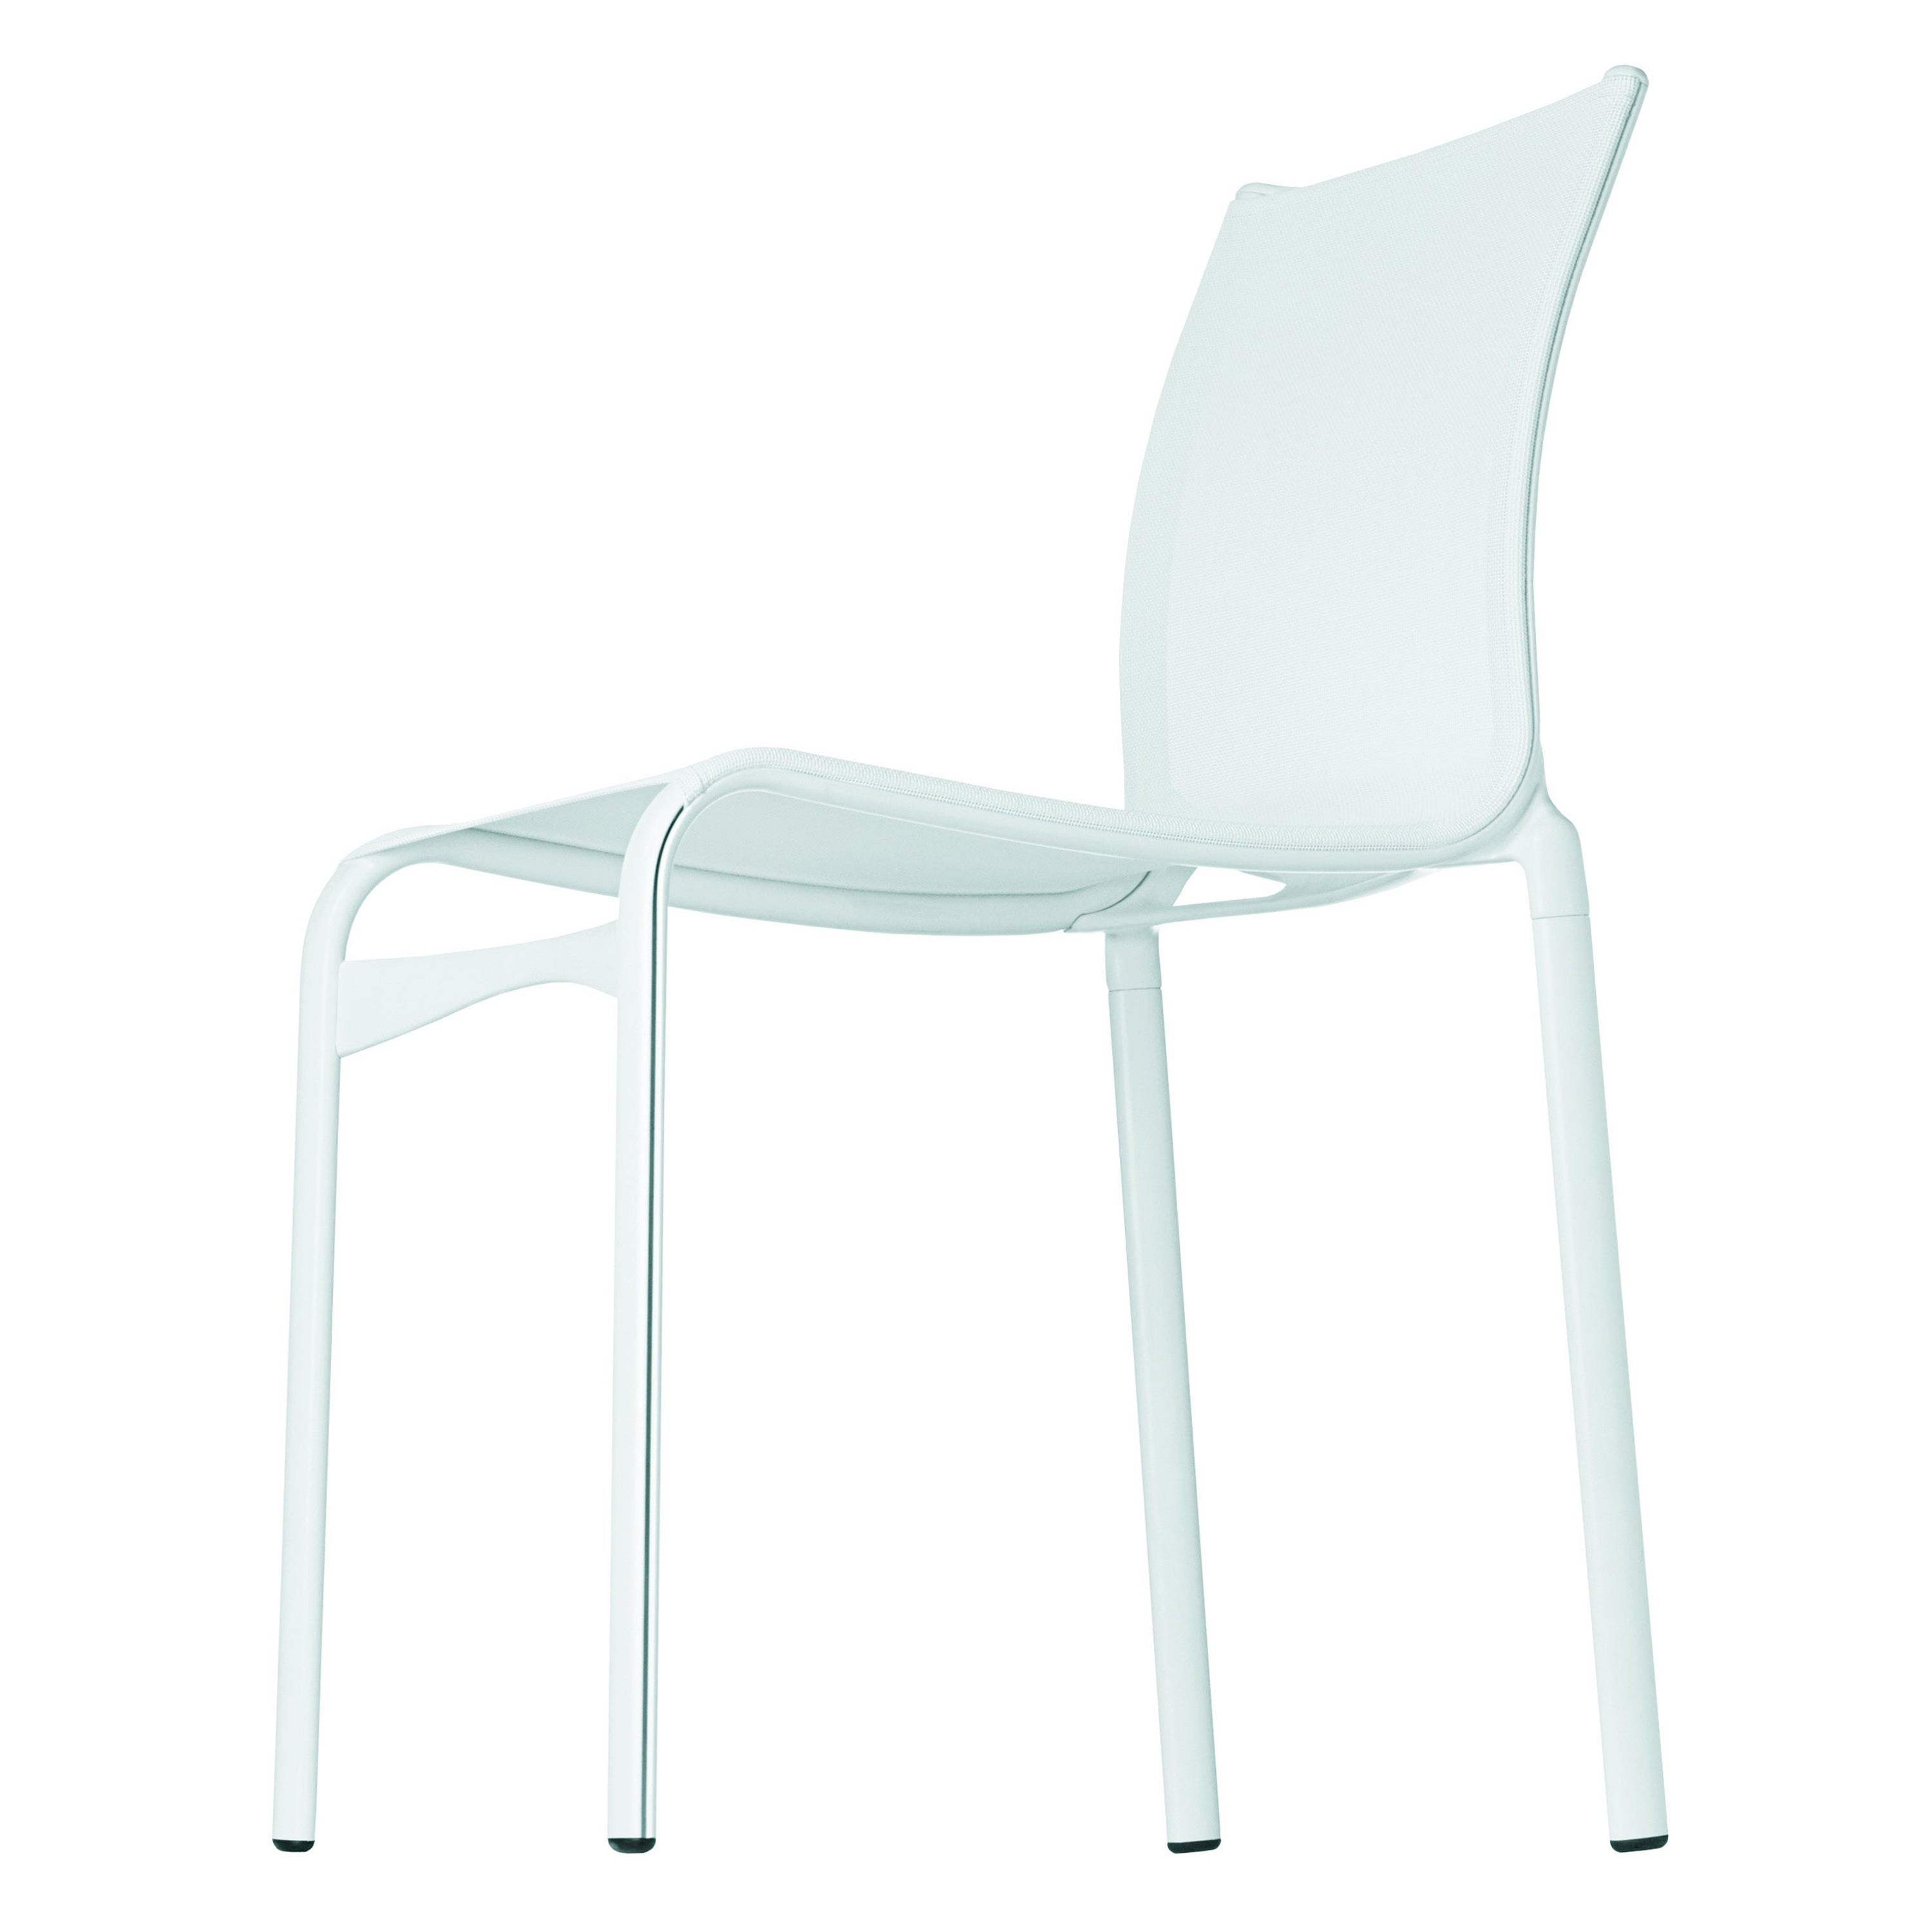 Alias Highframe 40 Outdoor Chair in White Mesh with Lacquered Aluminium Frame For Sale